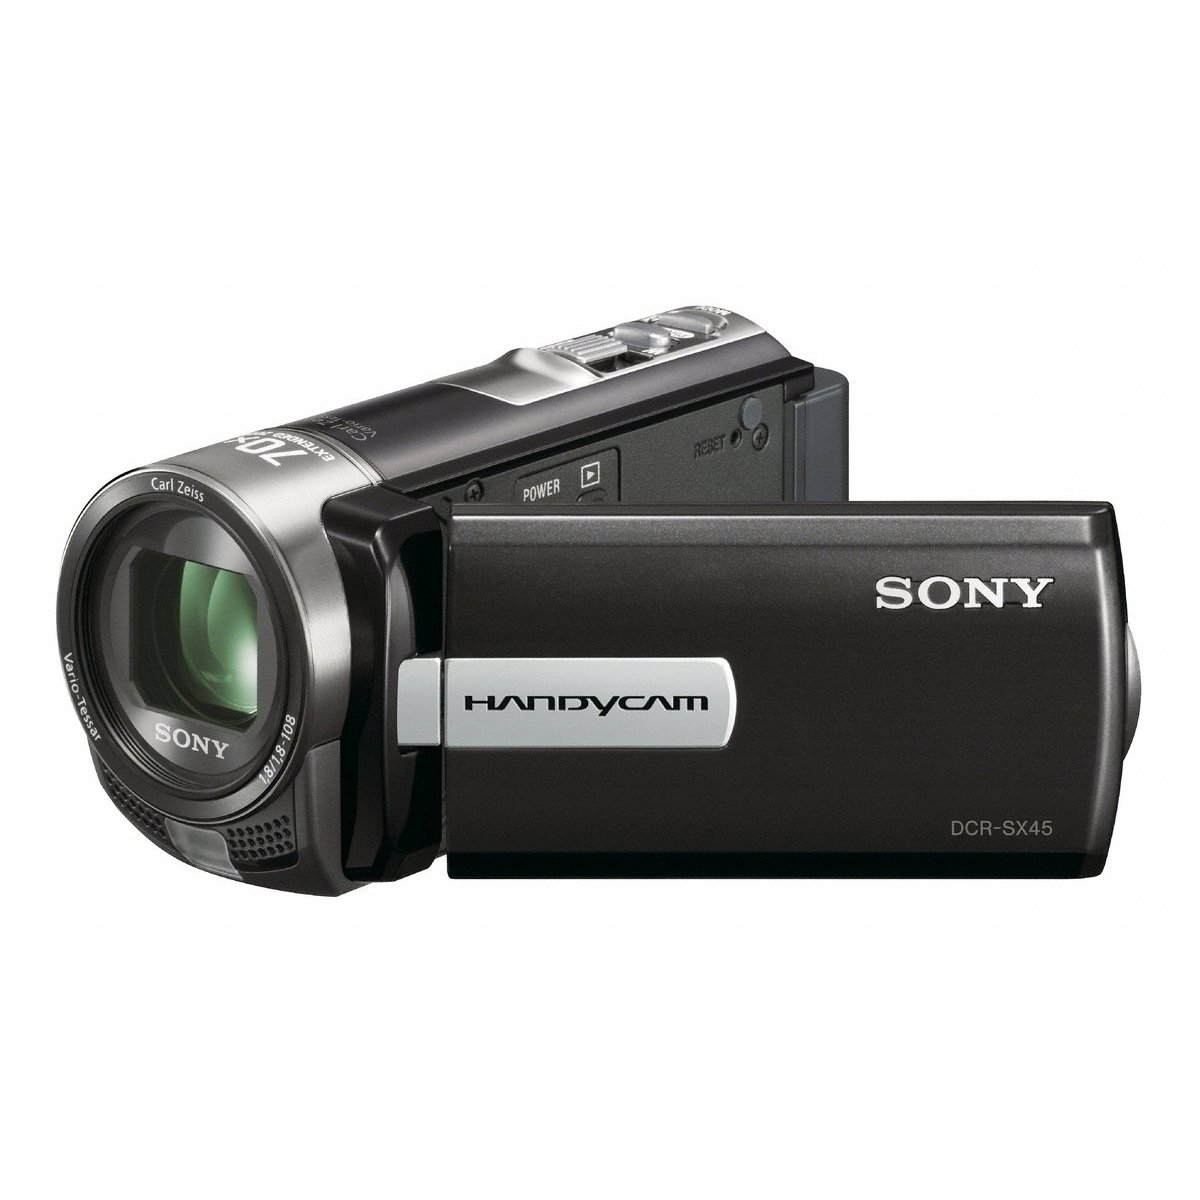 http://thetechjournal.com/wp-content/uploads/images/1108/1314692838-sony-dcrsx45-handycam-camcorder--1.jpg